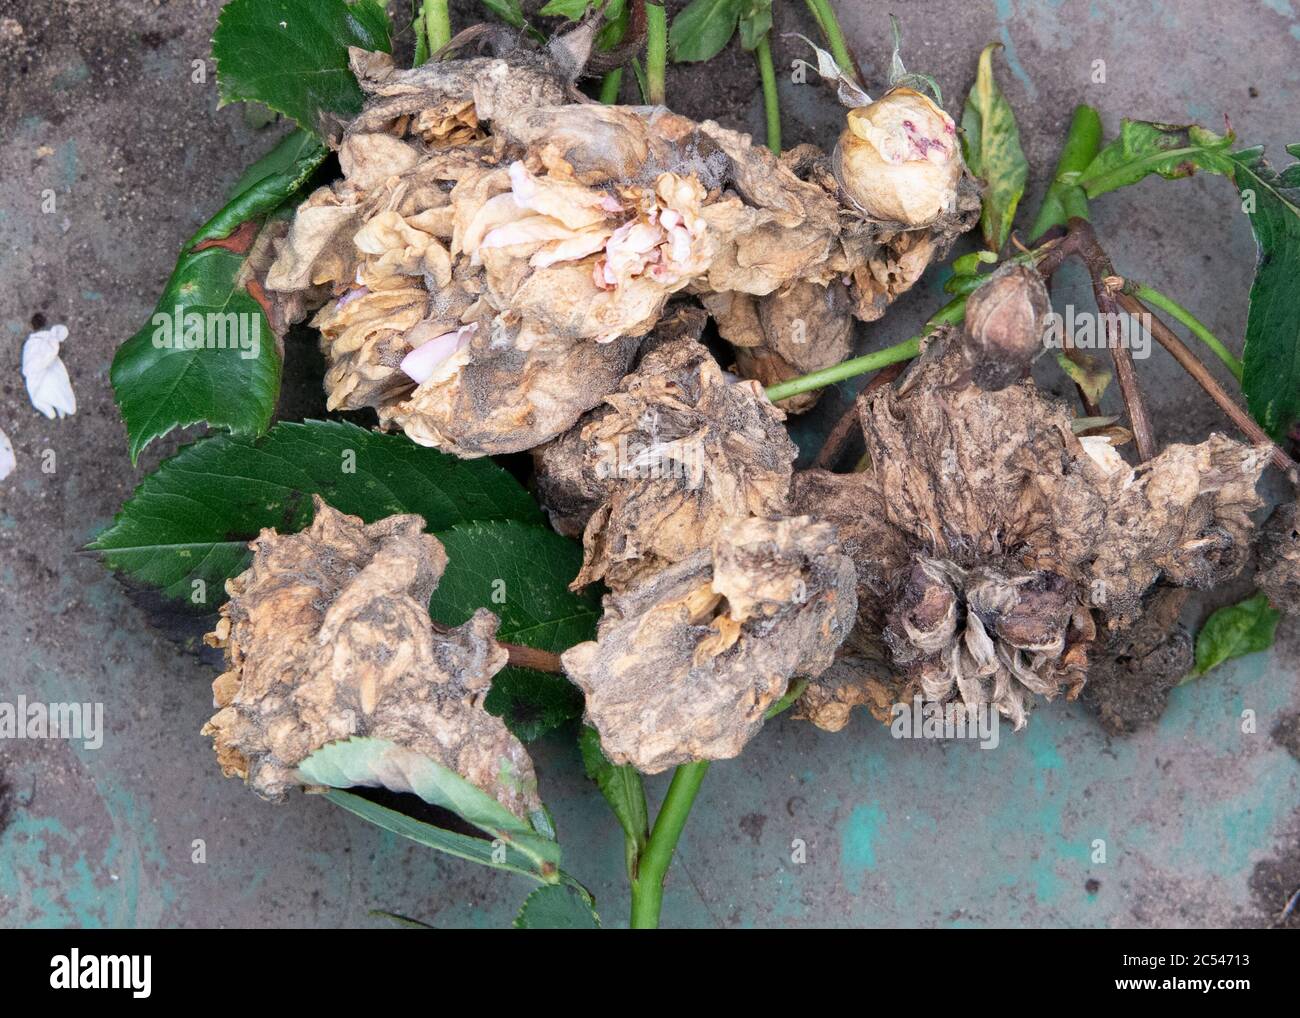 Botrytis cinerea on rose heads that have been removed from affected rose plant after a period of warm temperatures and heavy rain Stock Photo